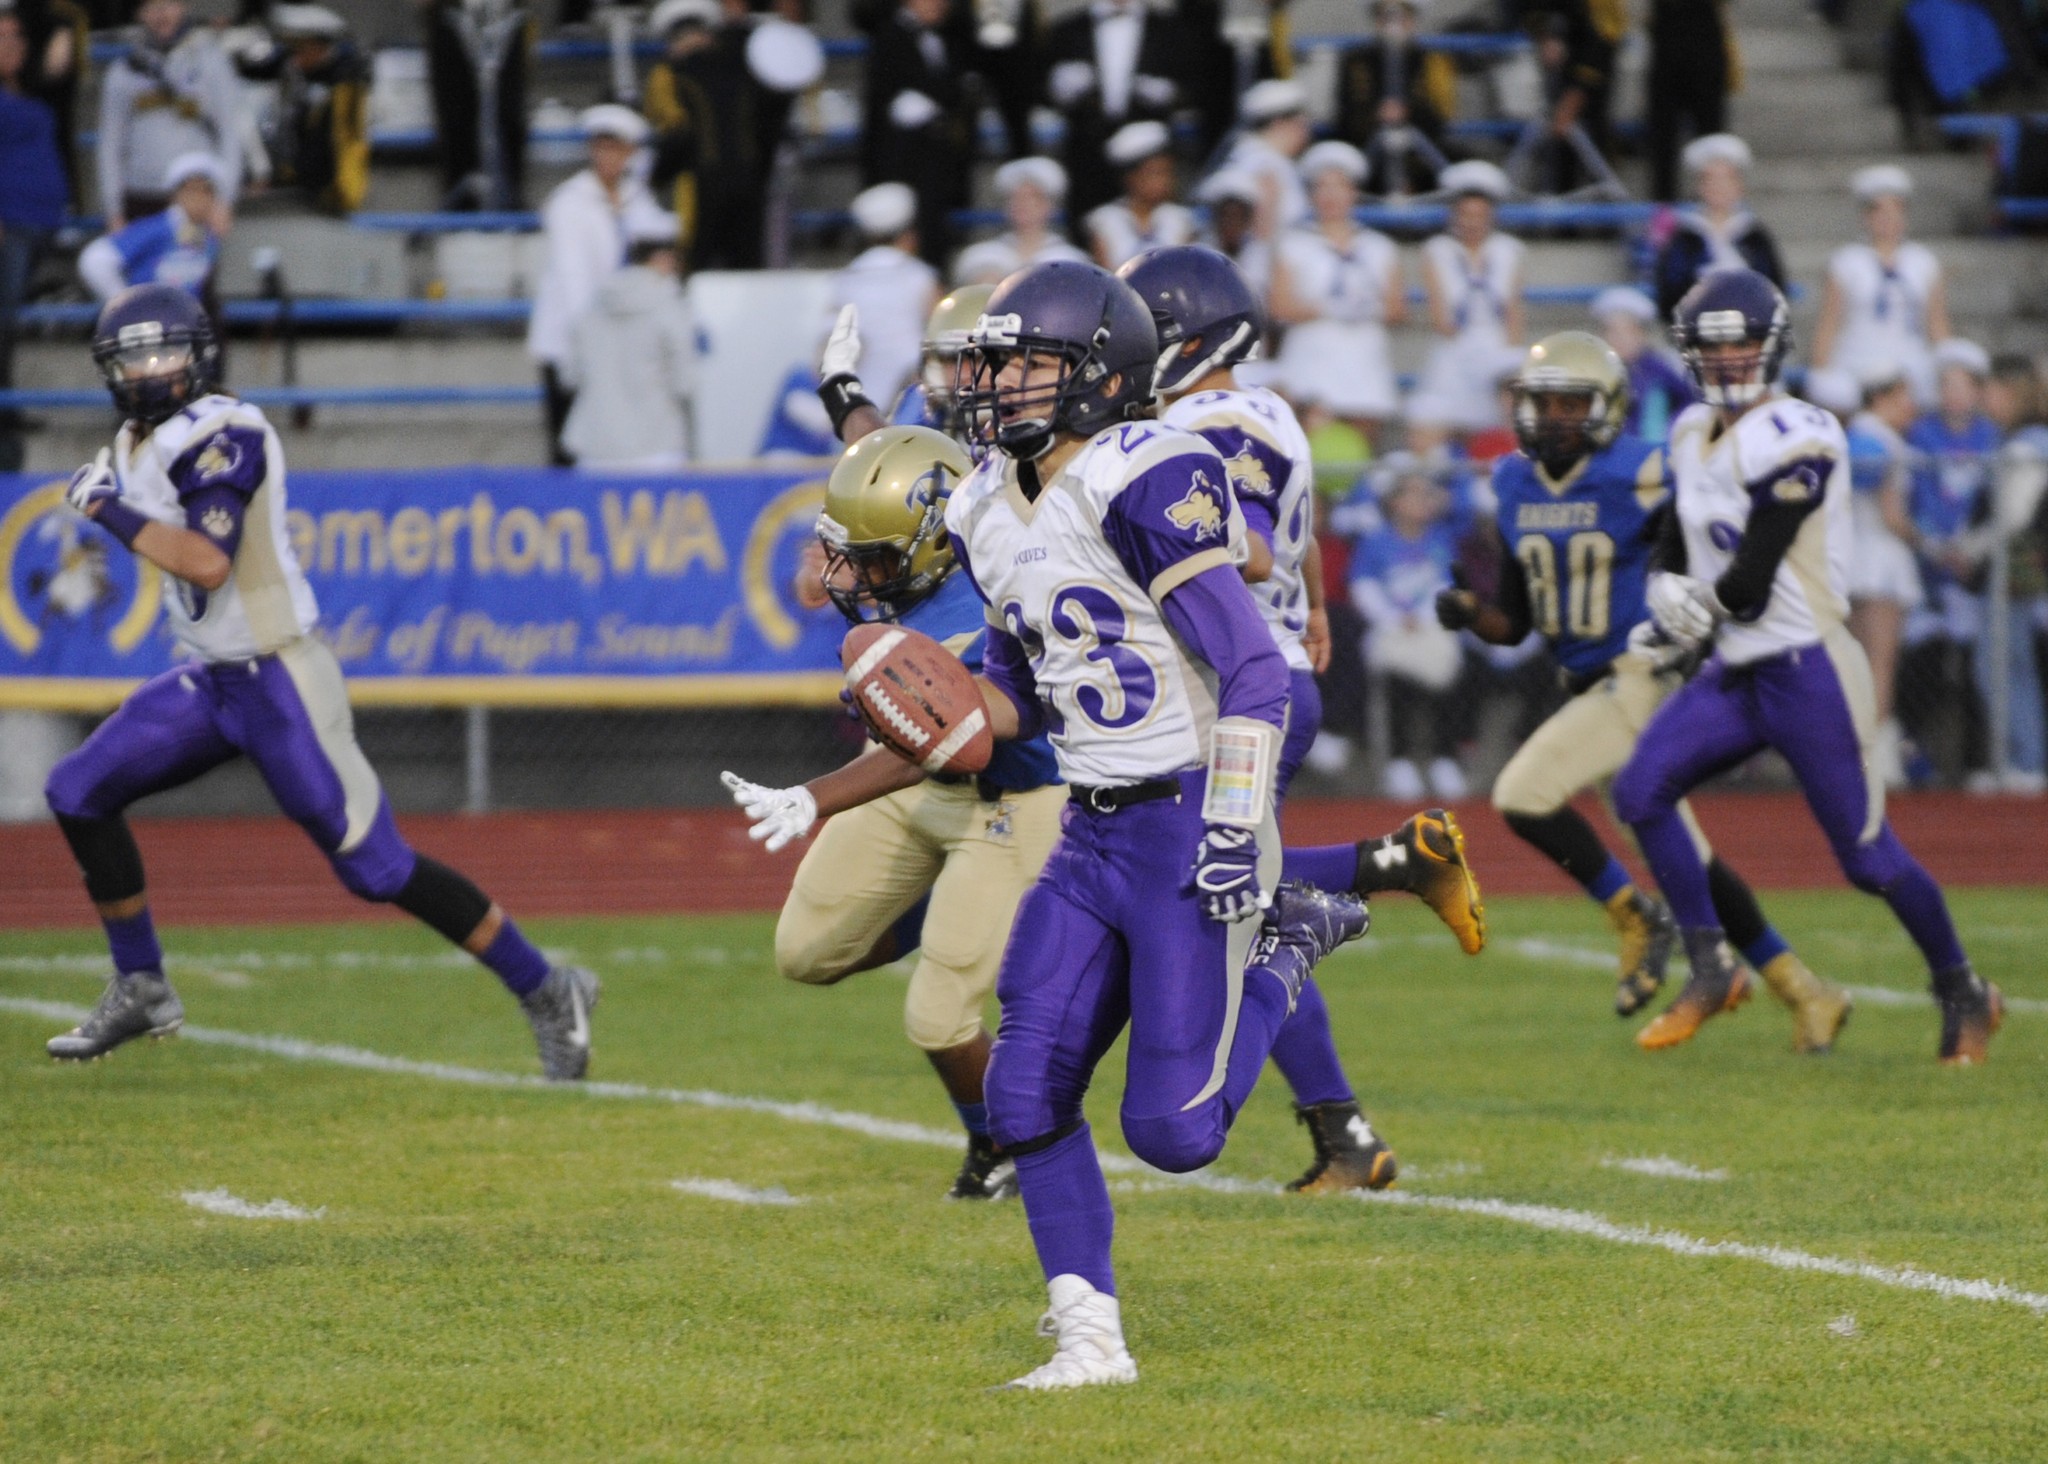 Sequim’s Gavin Velarde scored nine touchdowns between two games in one week to become WIAA athlete of the week in football. Sequim Gazette file photo by Michael Dashiell